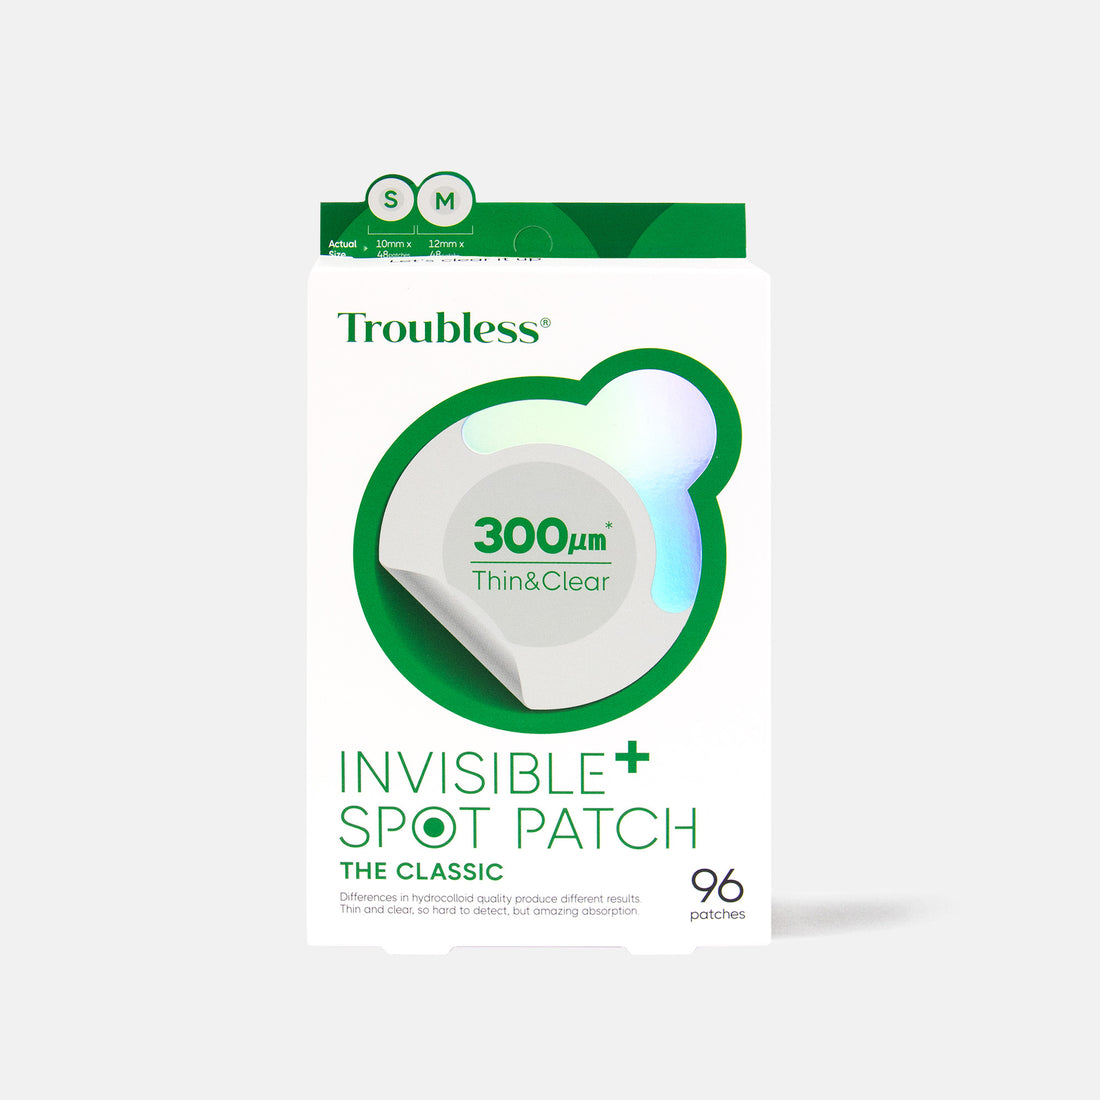 Troubless | The Classic Invisible Spot Patch